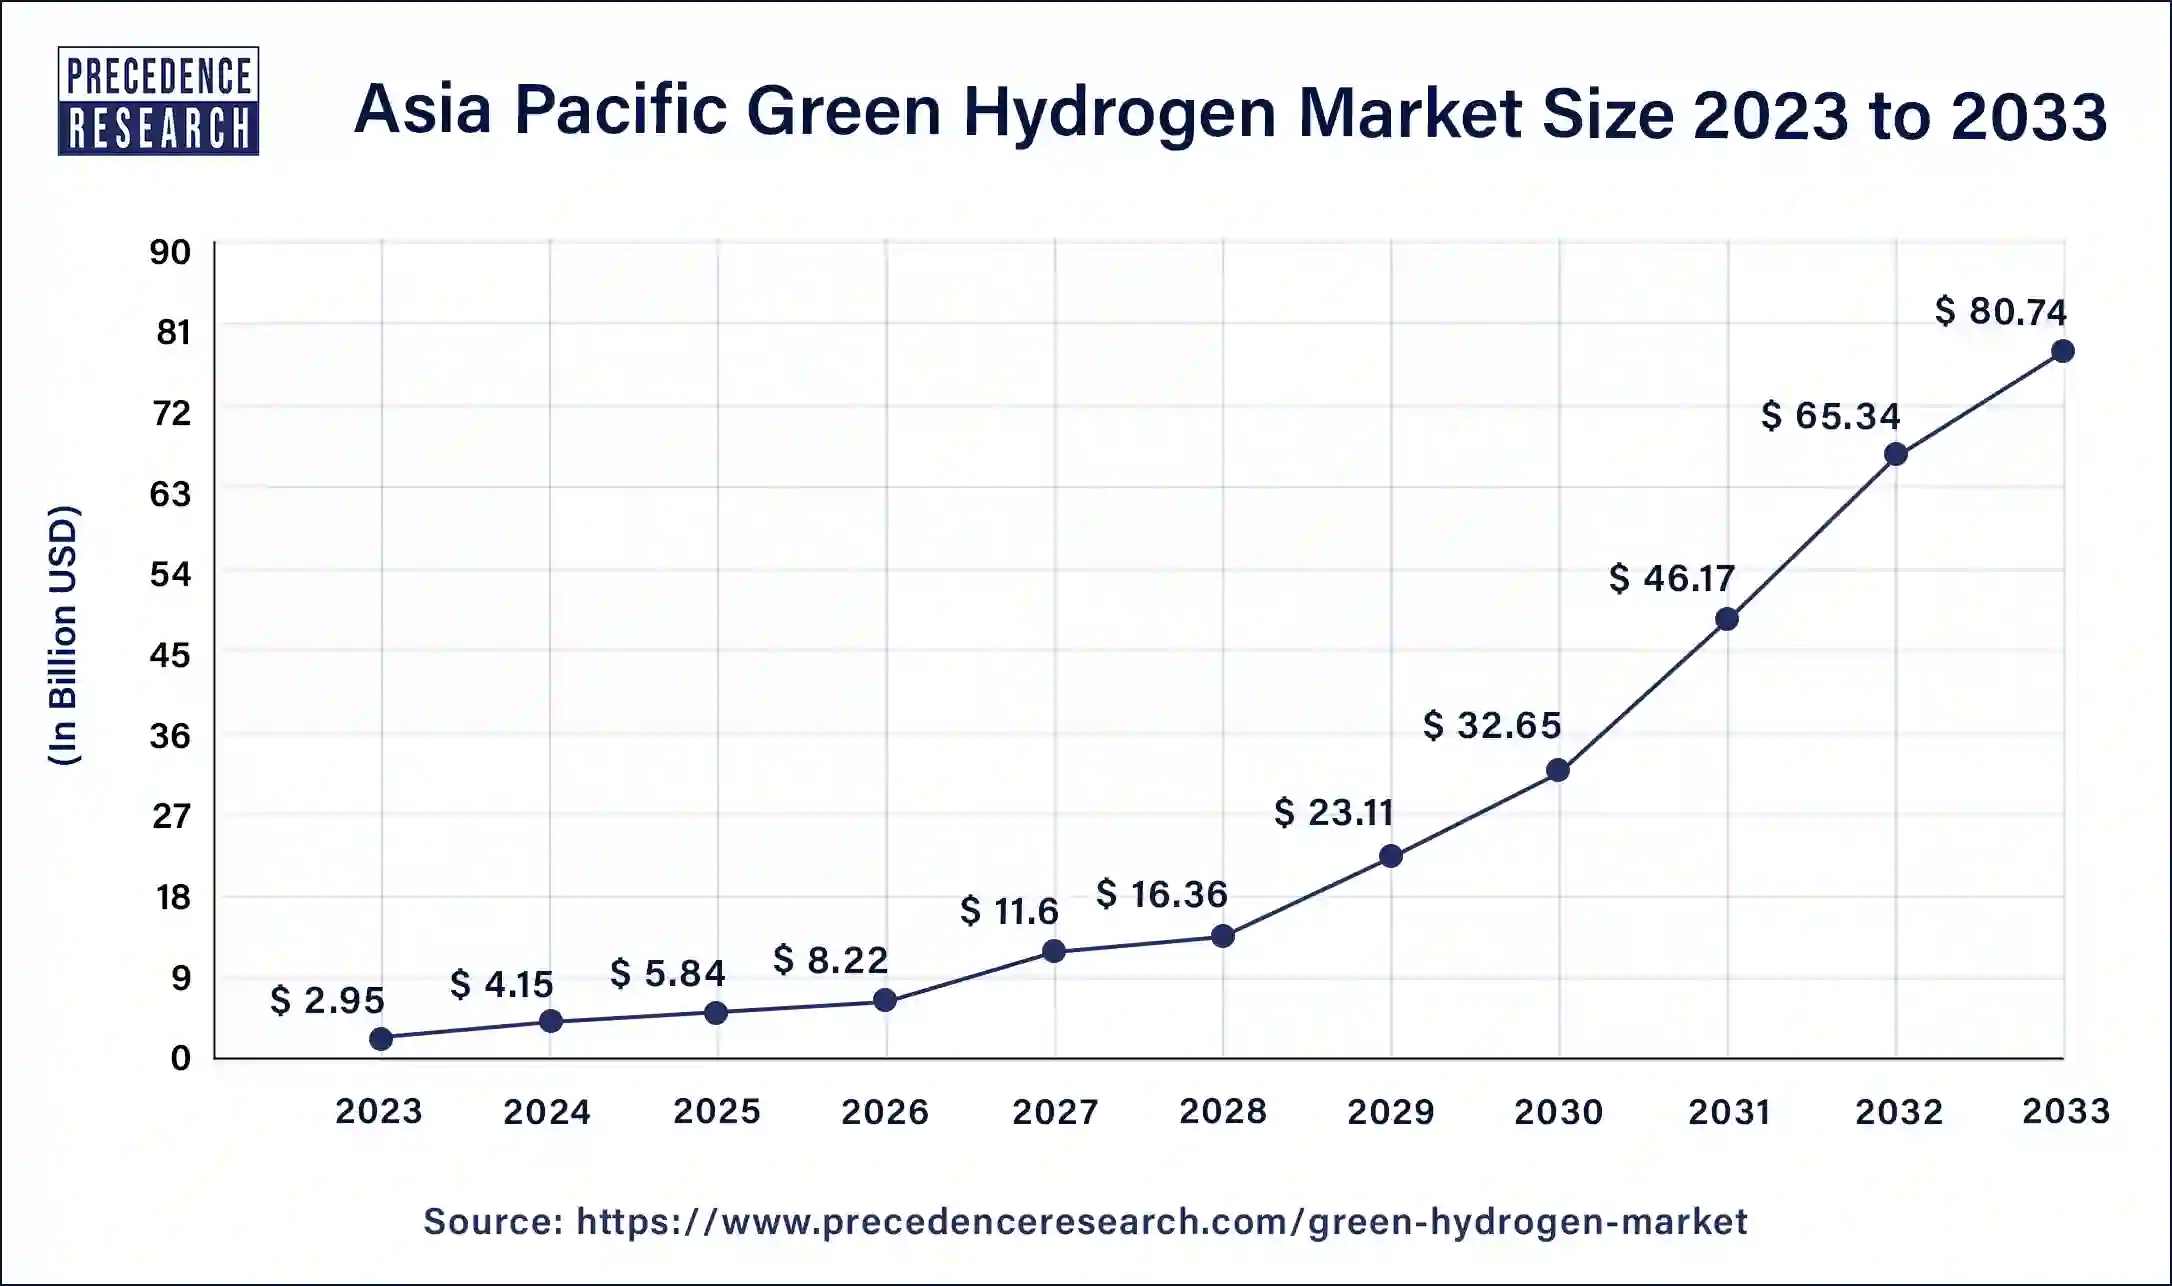 Asia Pacific Green Hydrogen Market Size 2023 to 2033